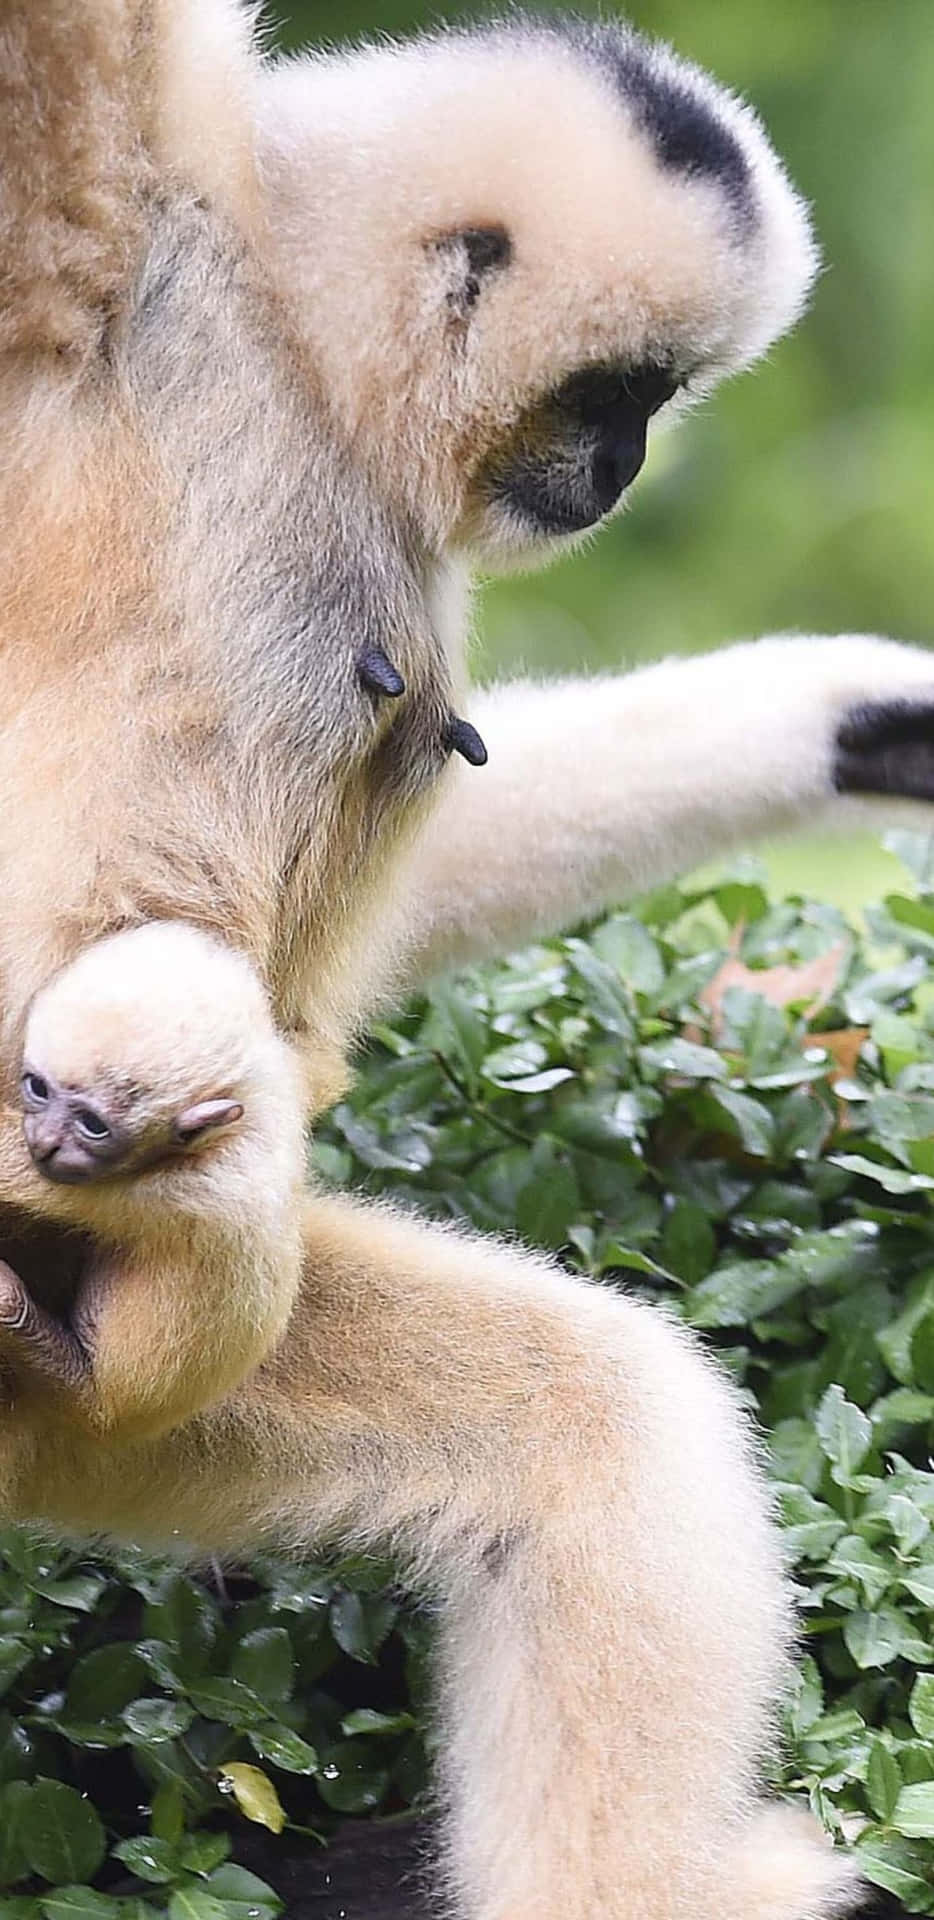 A Baby Gibbon Is Holding Its Mother's Hand